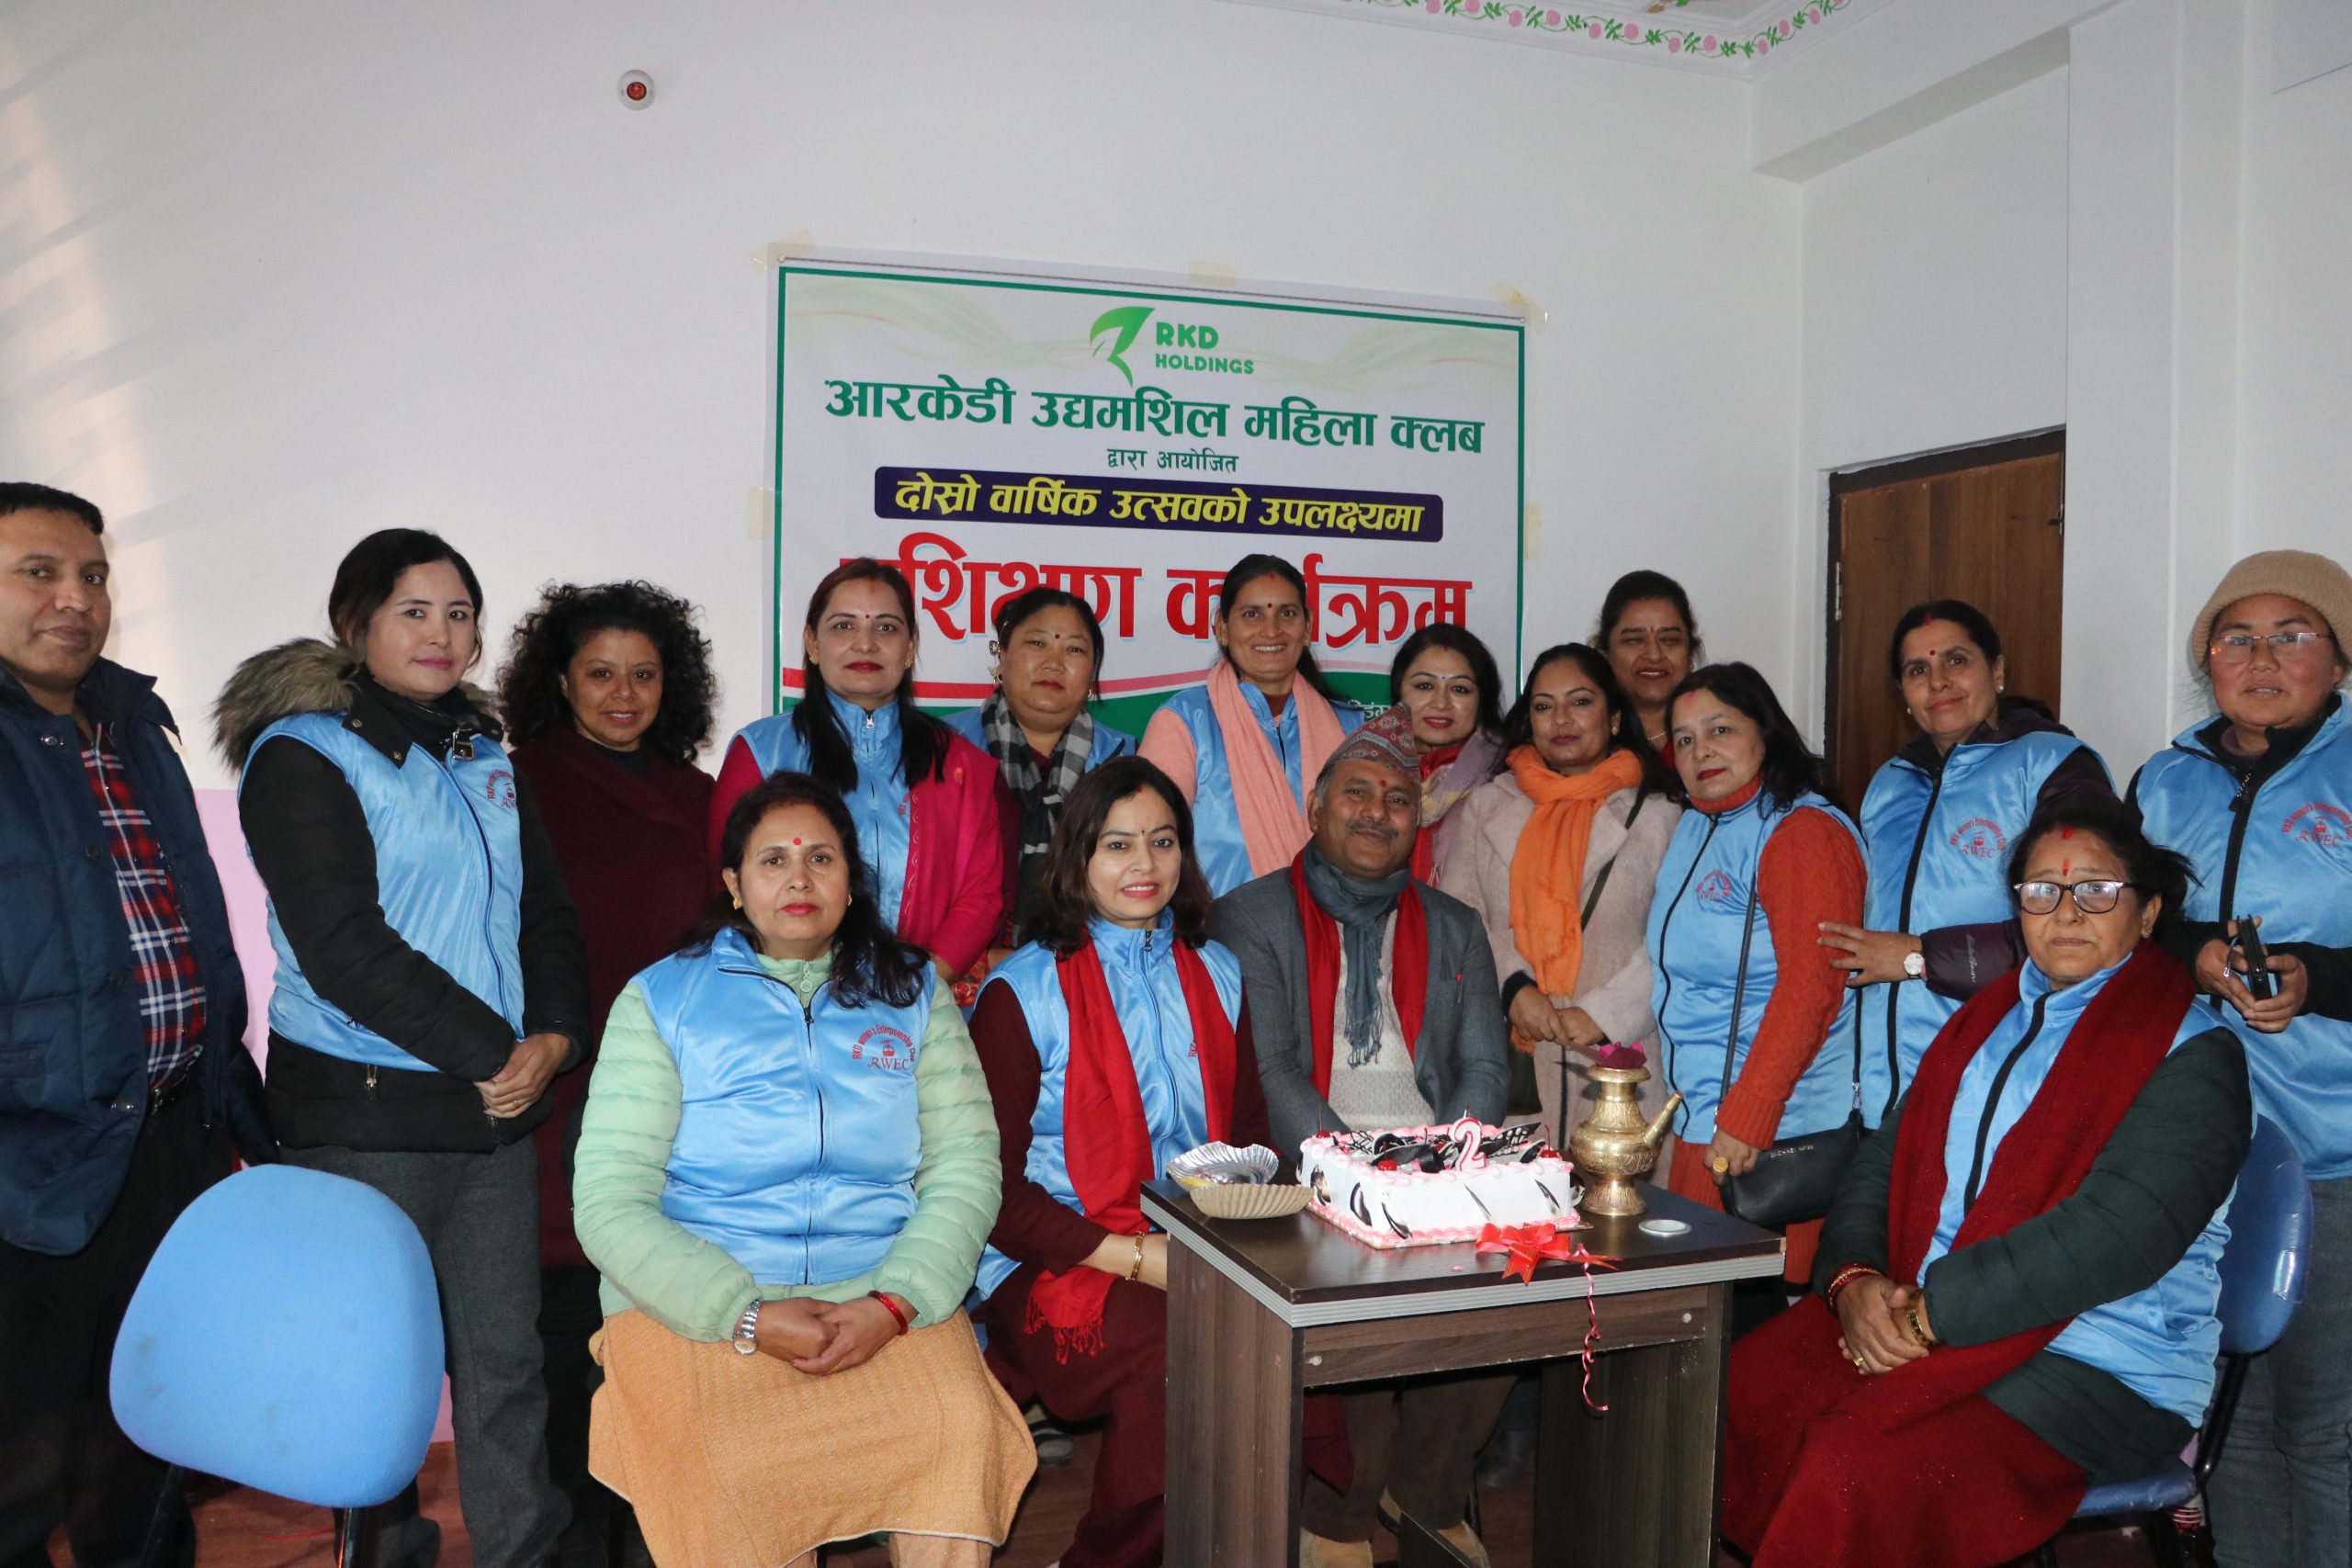 RKD Women Empowerment Club completed its 2 years on 20th Jan 2023, Friday. It held a small program at the main office of RKD Holdings Company. The title of the program was RKD Women Empowerment Club Training Program on the occasion of the 2nd Anniversary. All the members of the RKD Women Empowerment Club were […]